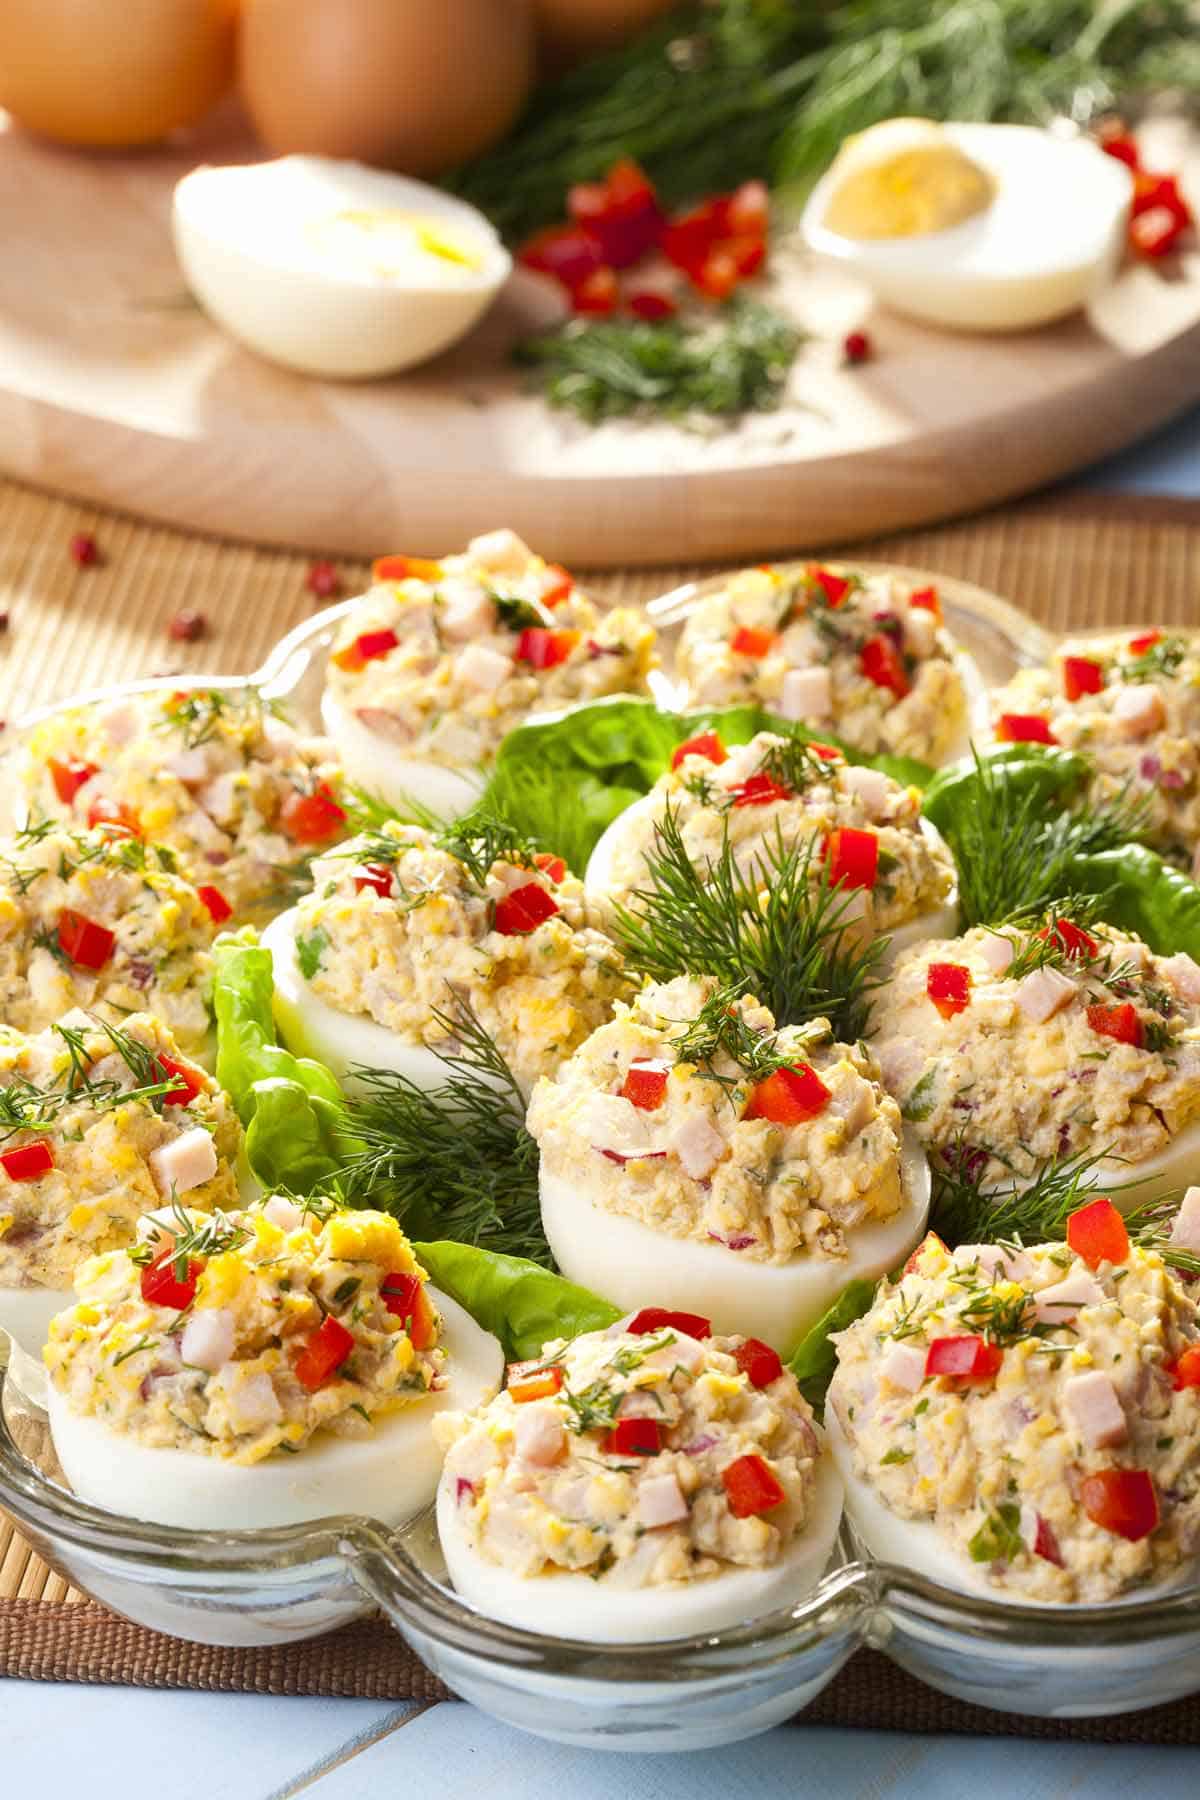 Chicken salad deviled eggs in a serving dish.